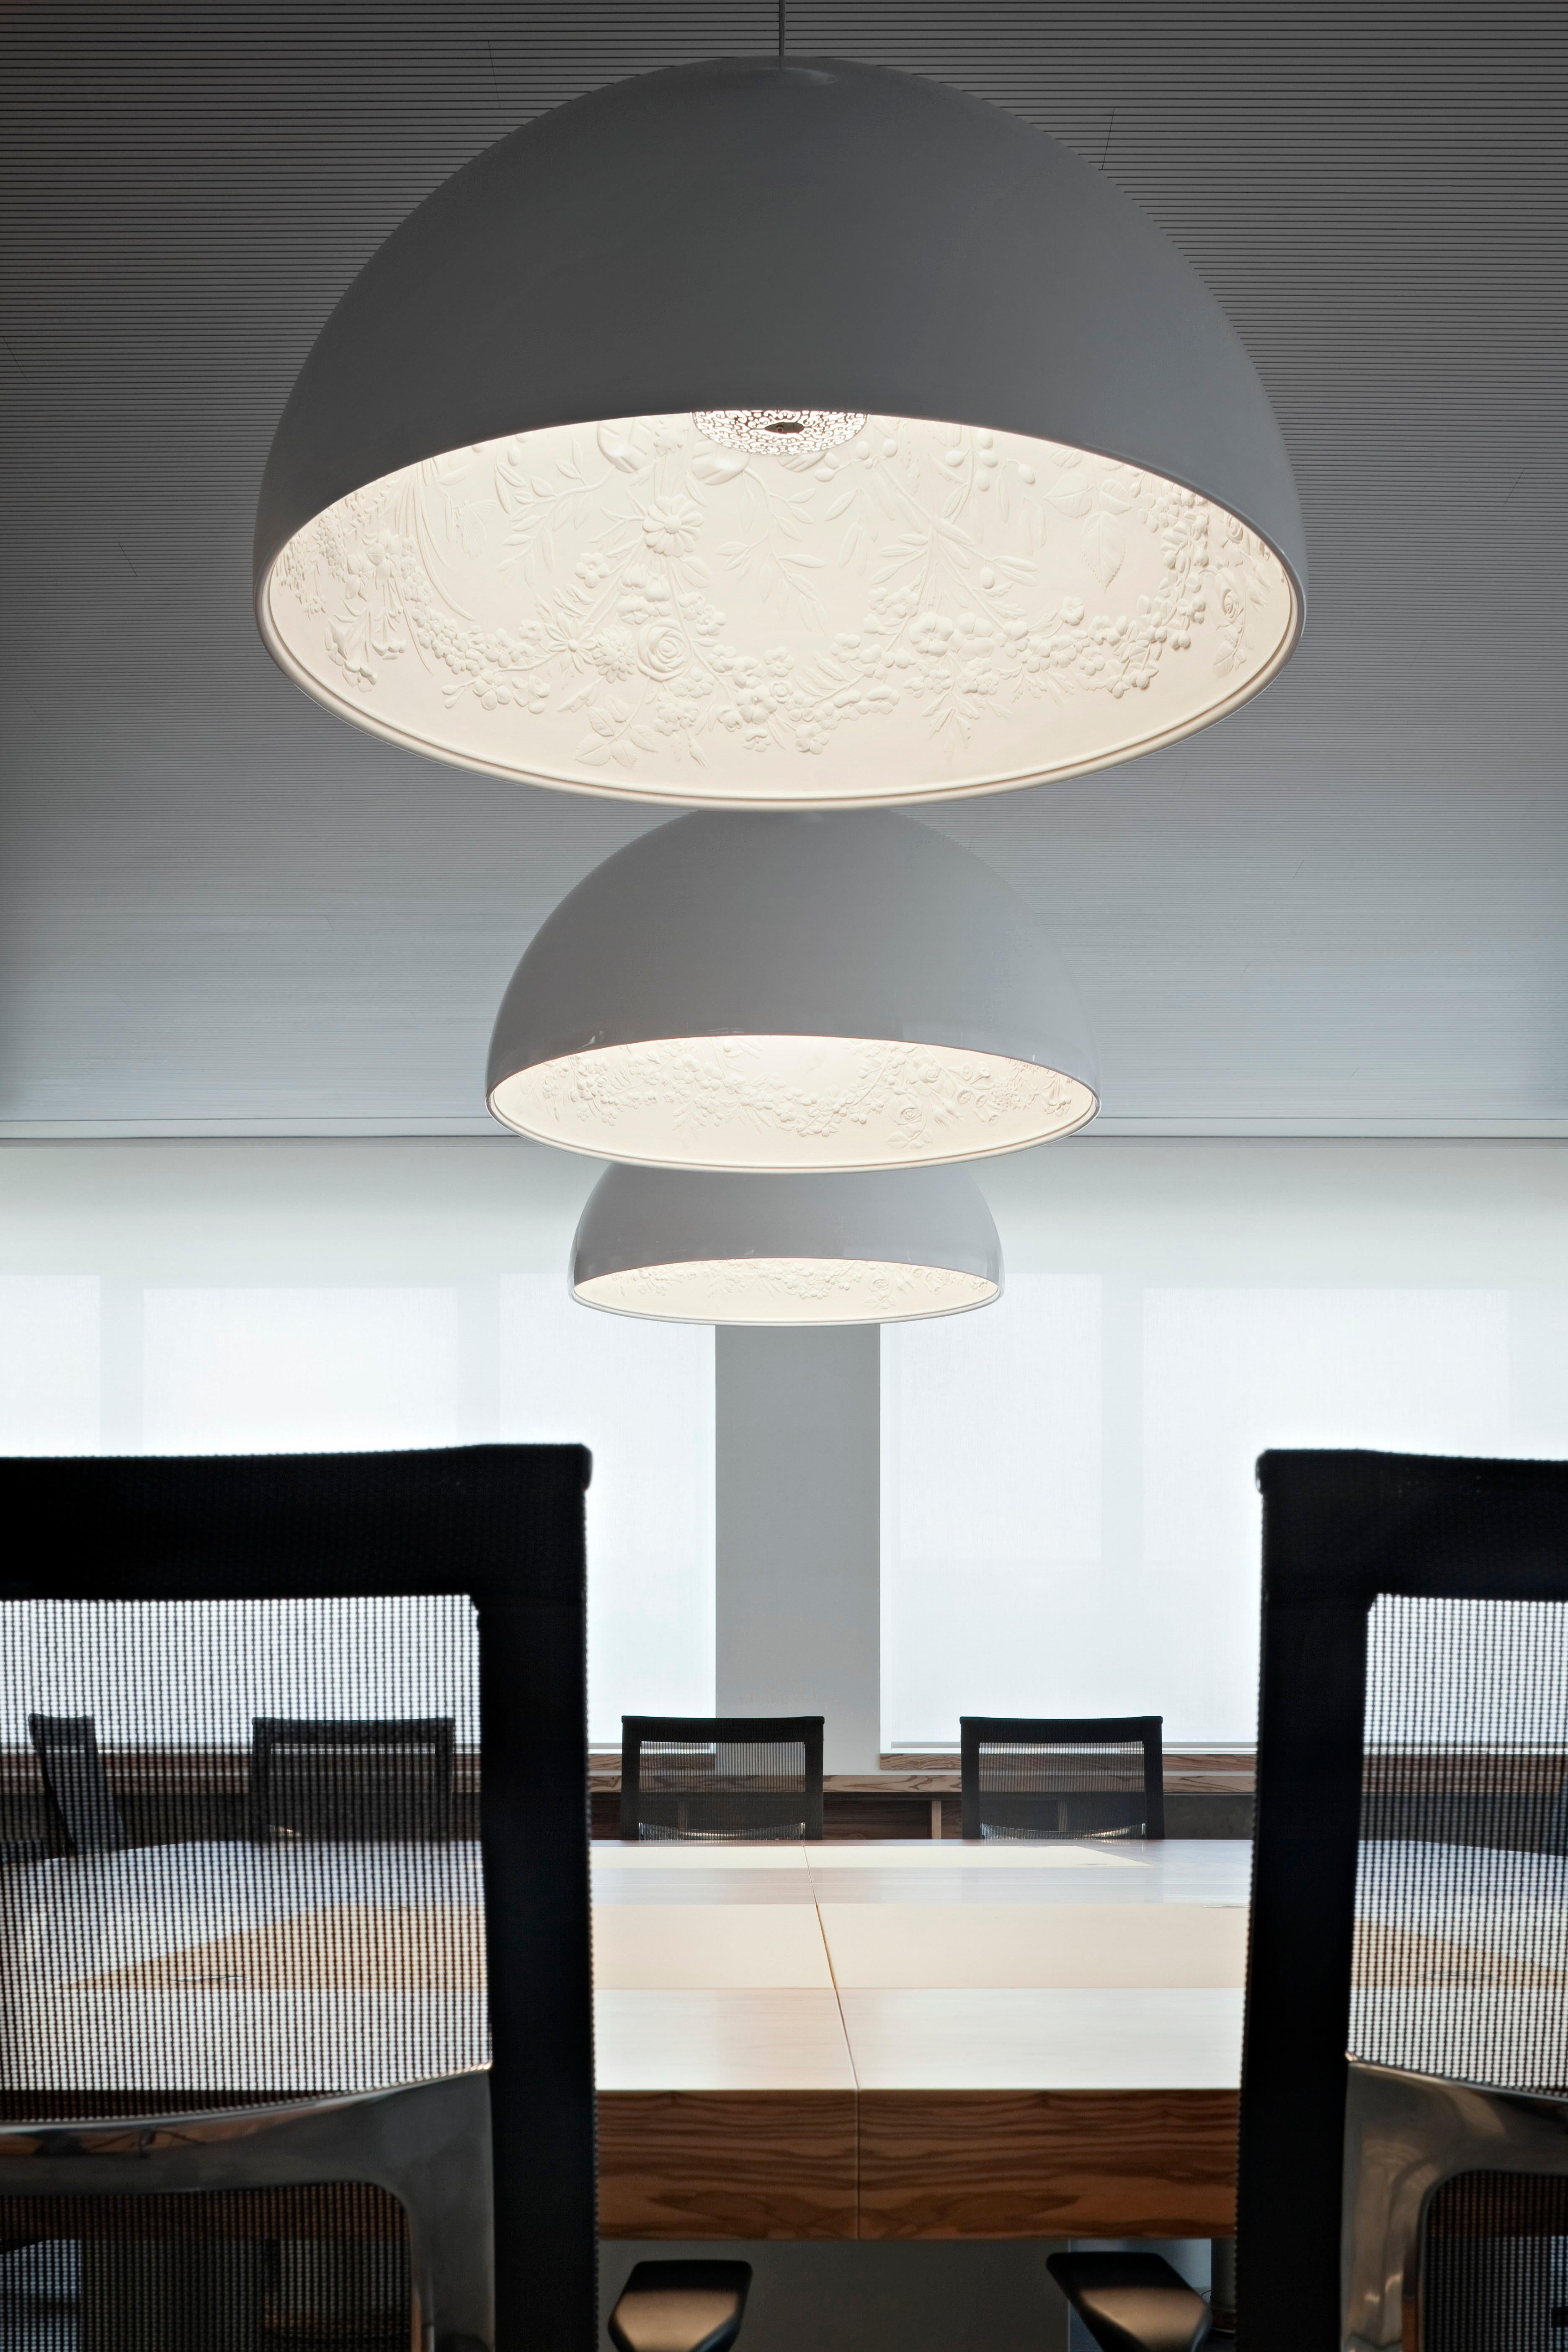 Imagine a stunning display blooming above you: Created by Marcel Wanders, the Skygarden S is just that. A gracefully hanging hemisphere, the pendant lamp makes a powerful impression with its sheer size. However, it is the inner diffuser in white